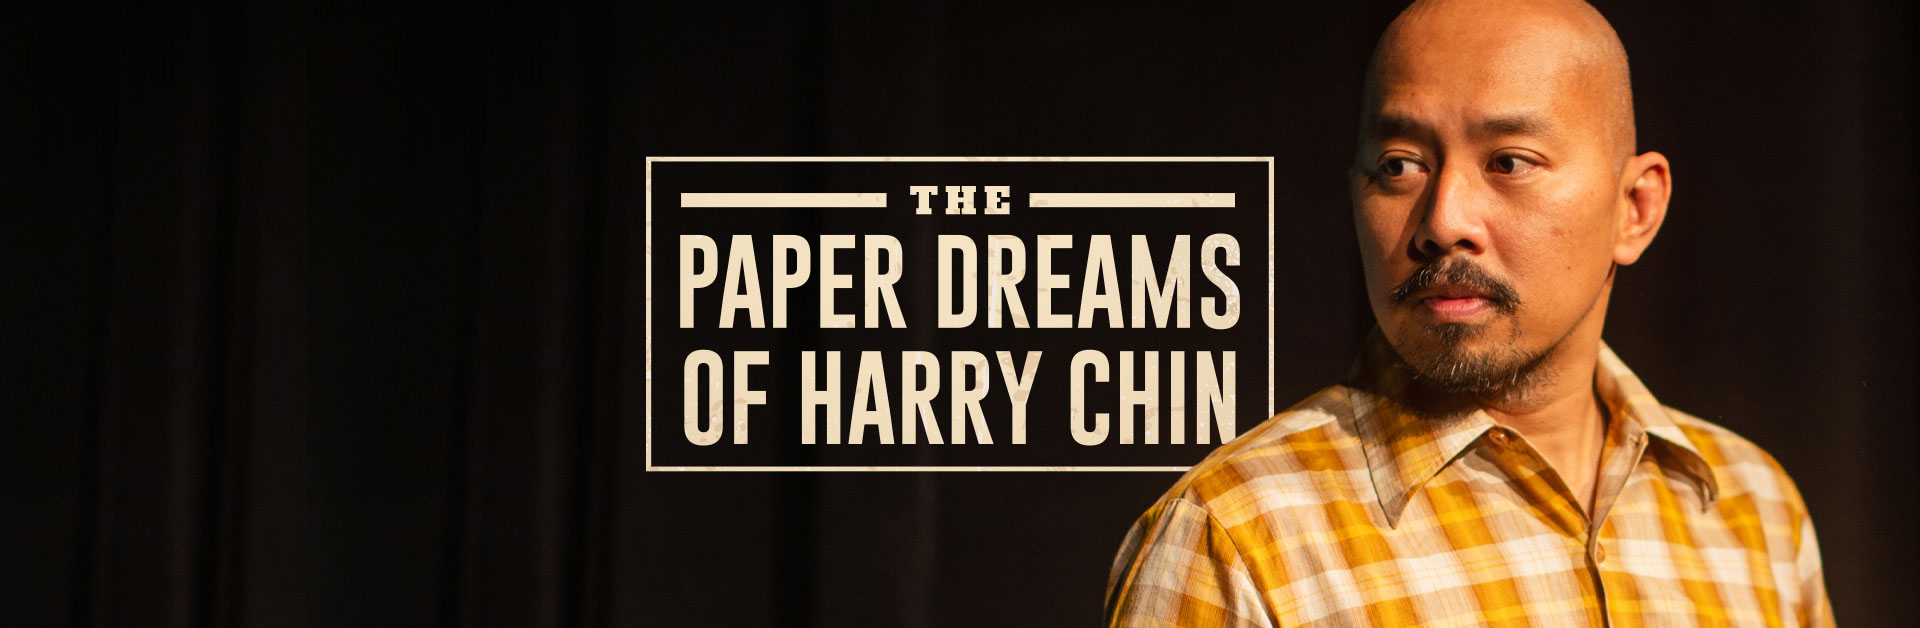 The Paper Dreams of Harry Chin – A Note from the Artistic Director